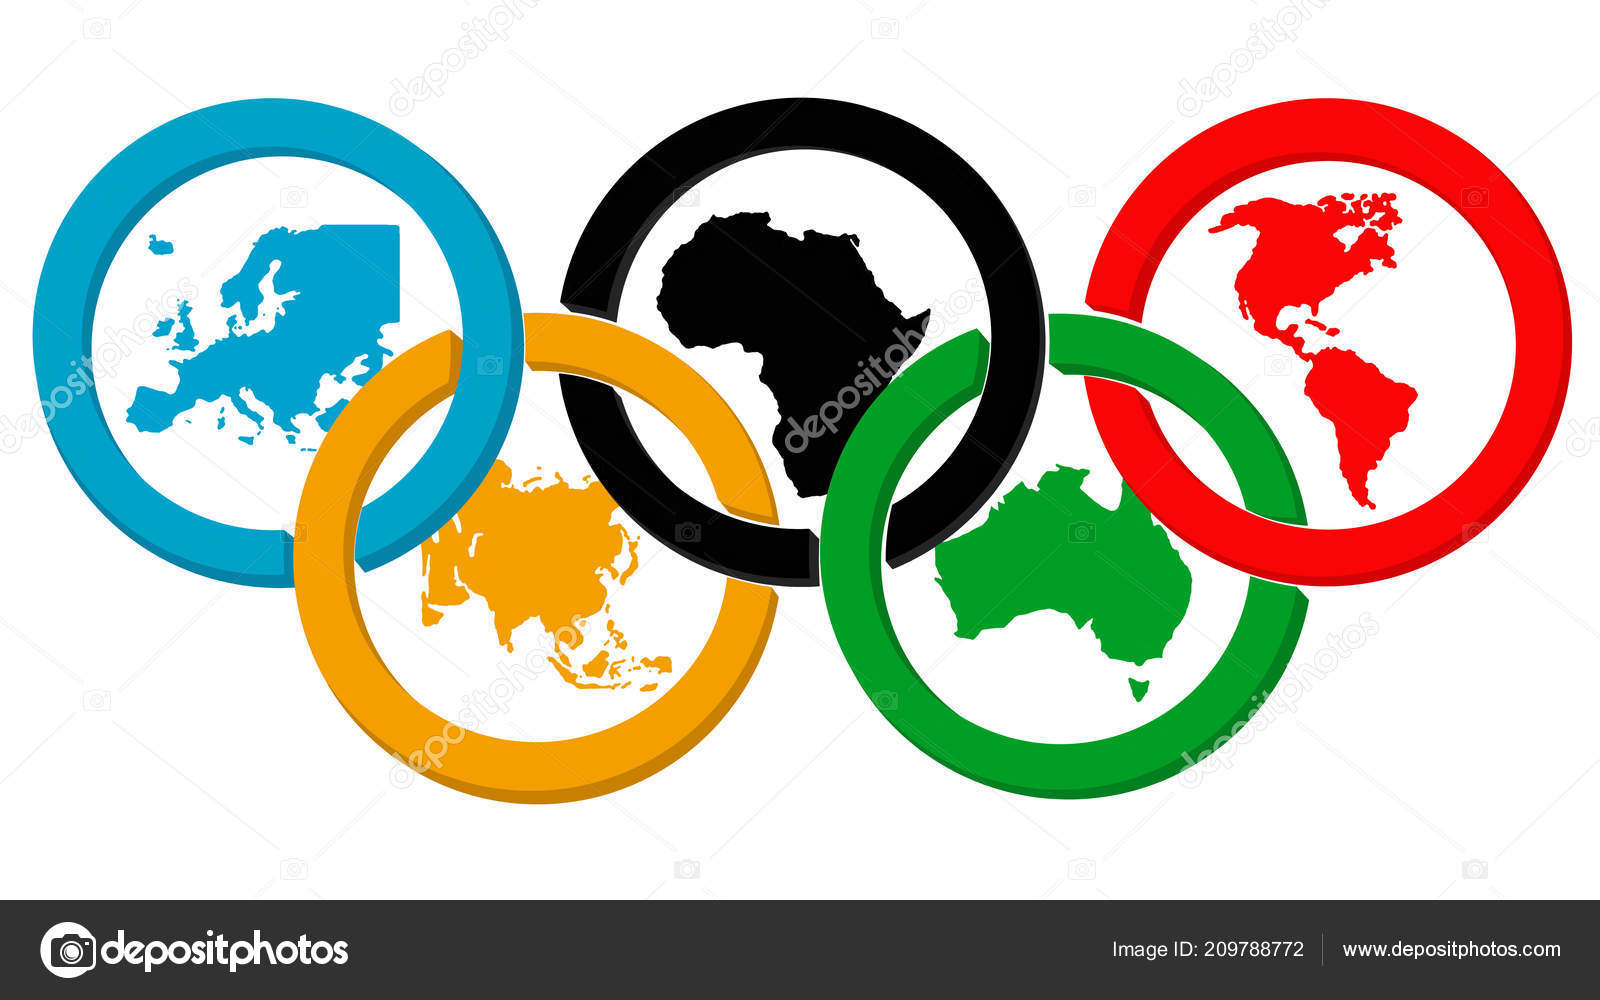 Olympic Rings Clipart Transparent PNG Hd, Vector Illustration Of Brush  Painted Olympic Rings Over White Background, Element, Medal, Game PNG Image  For Free Download